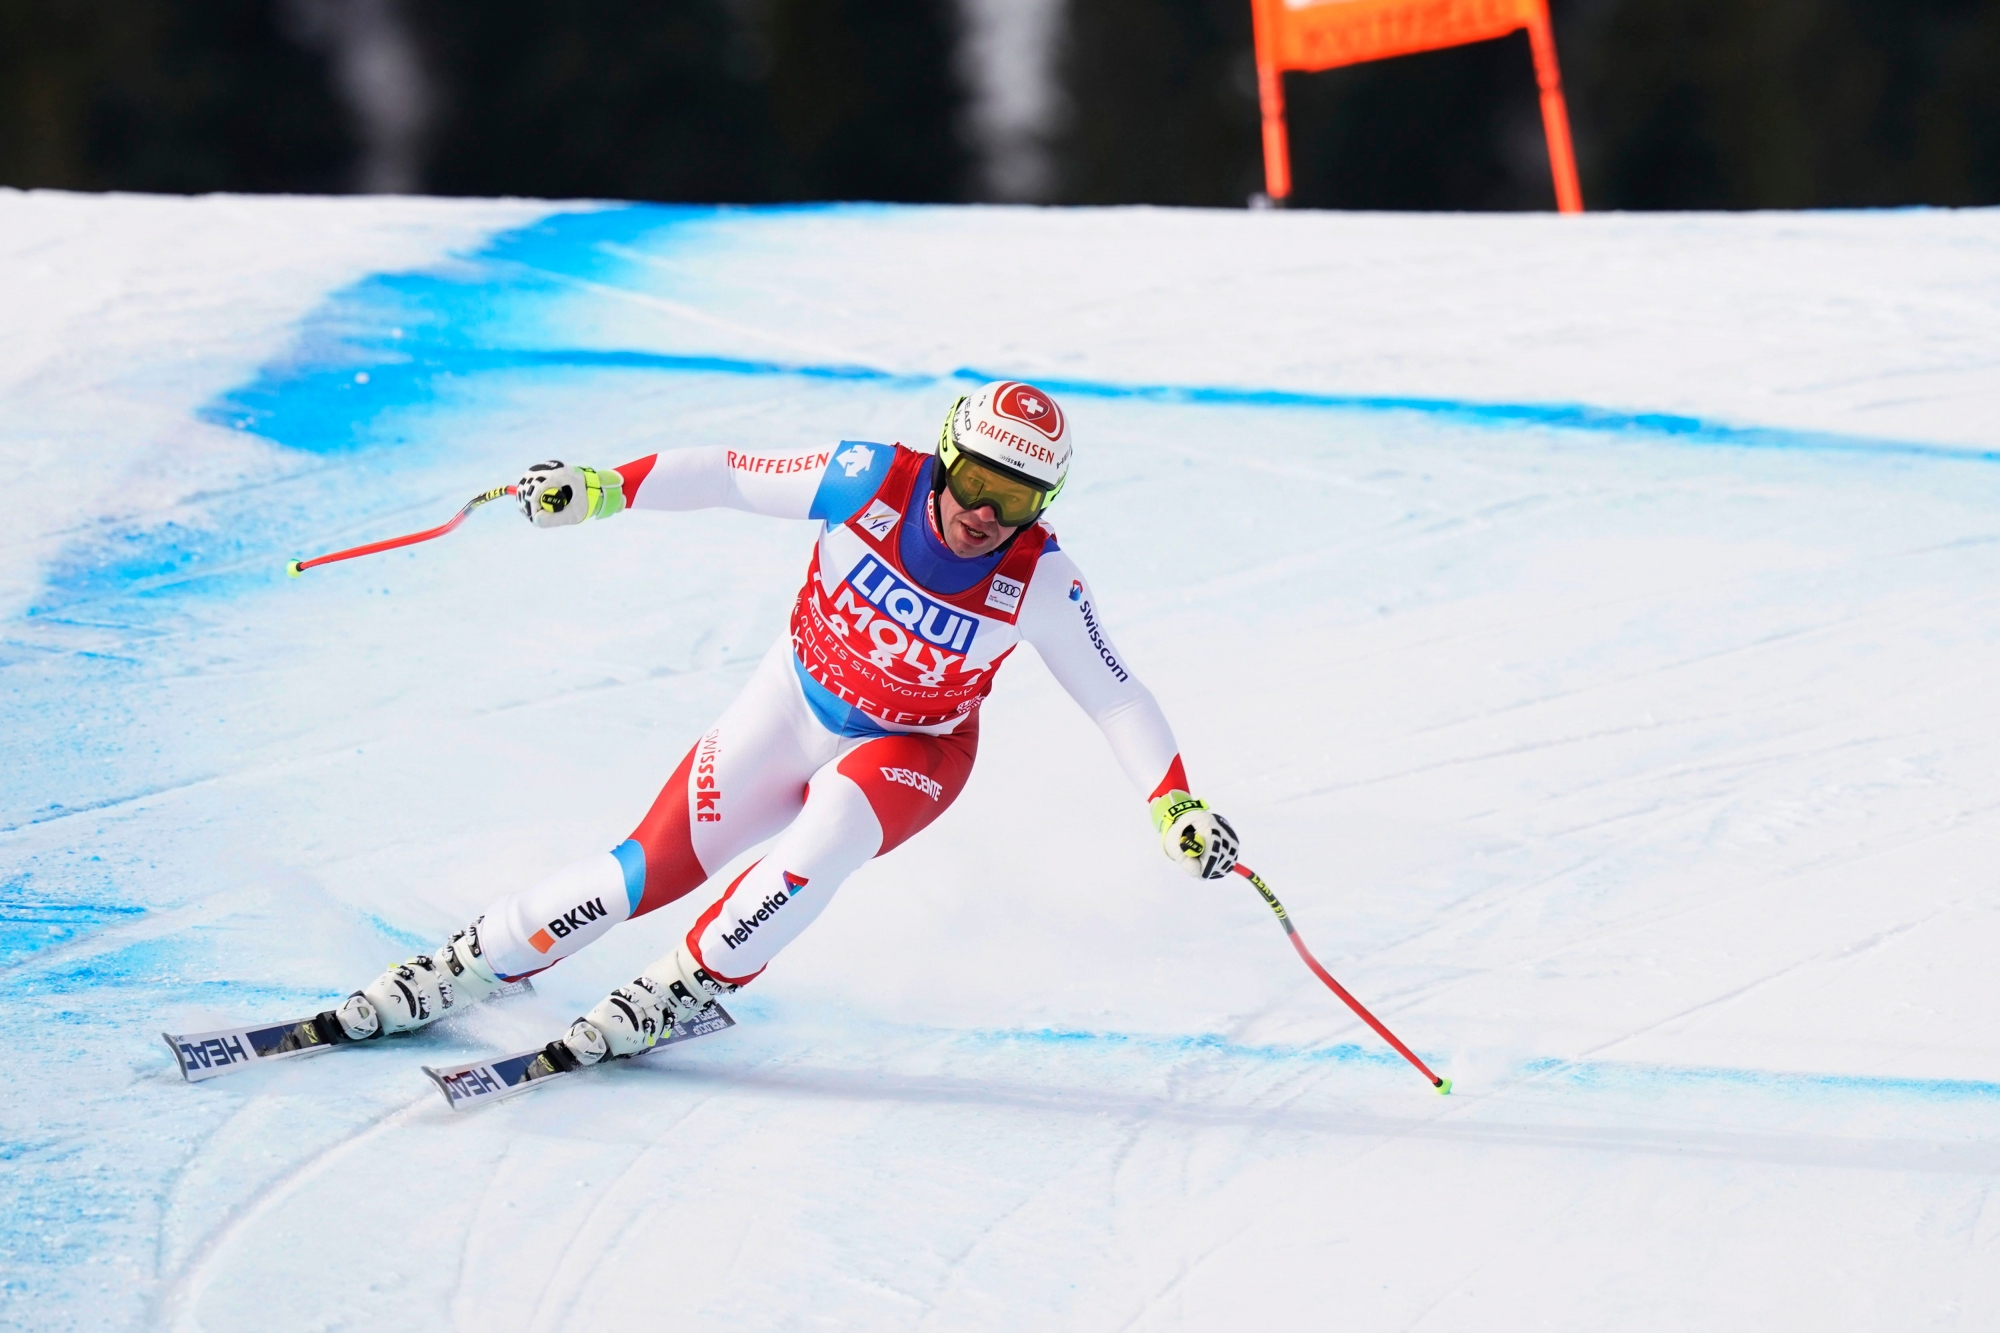 Switzerland's Beat Feuz competes during the men's downhill race in the FIS Ski World cup Saturday, March 2, 2019, in Kvitfjell, Norway. (Erik Johansen/NTB scanpix via AP) Norway Alpine Skiing World Cup